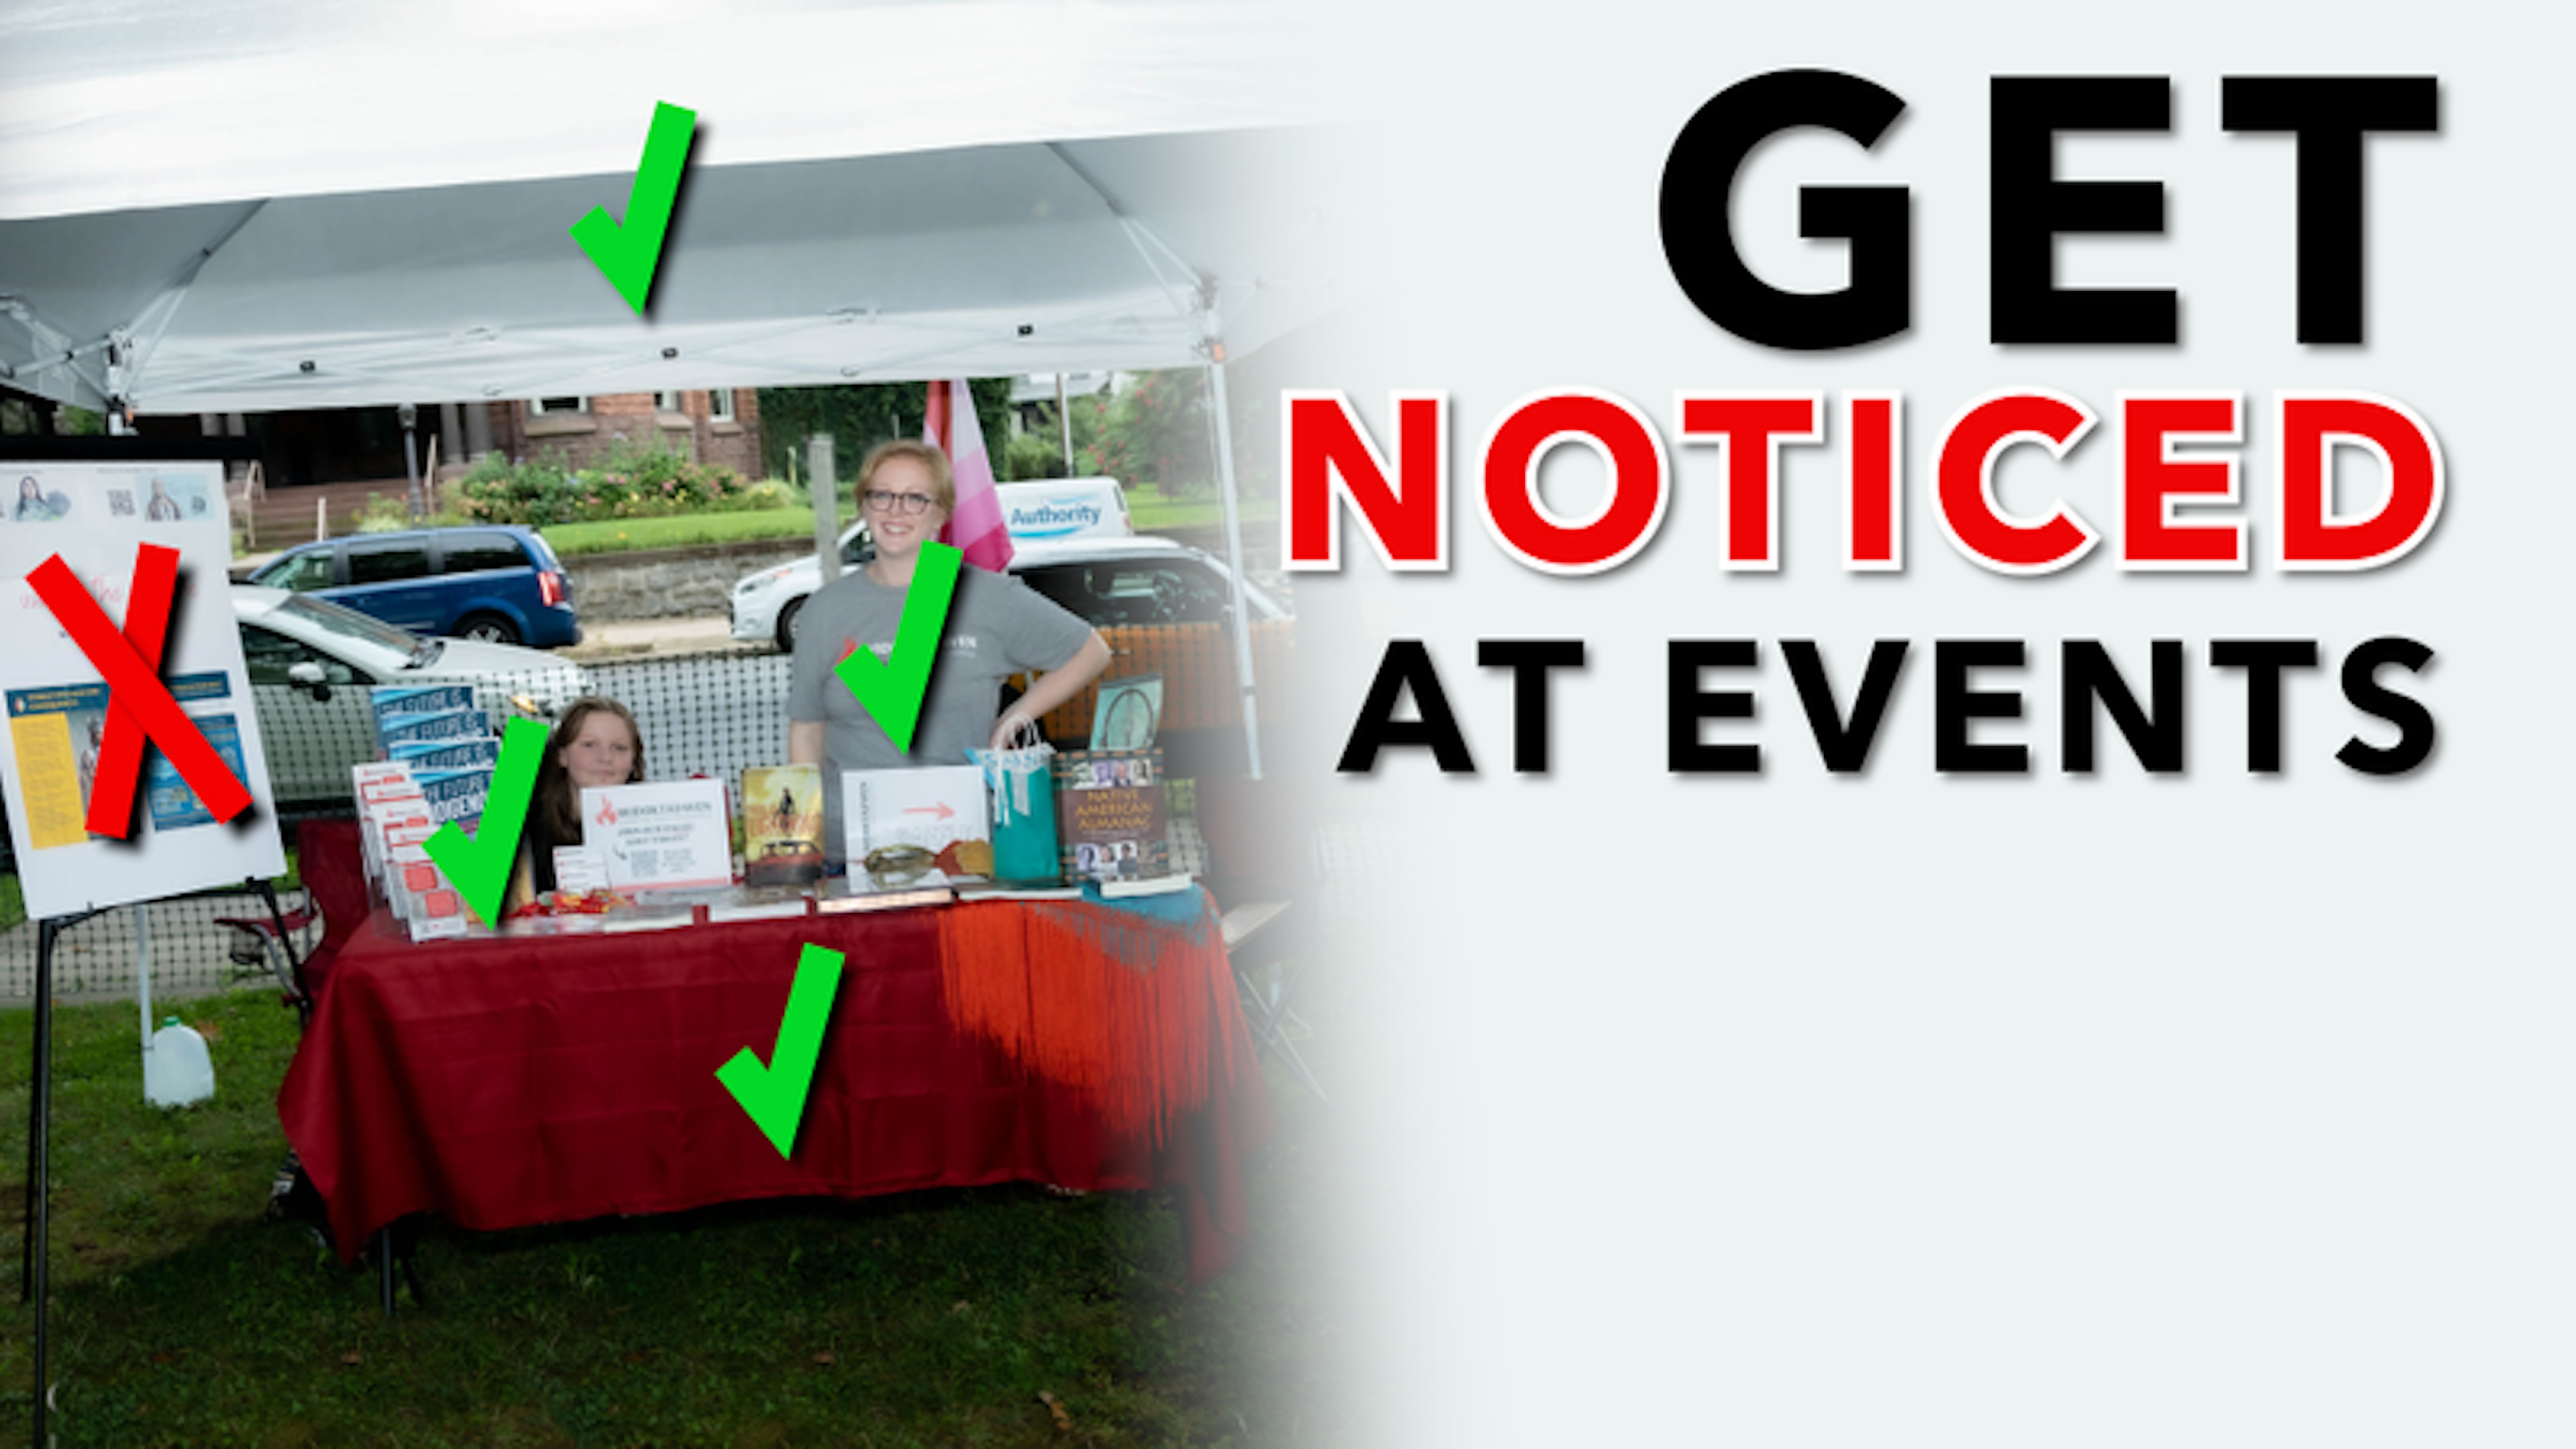 How To Be A Successful Vendor at Events